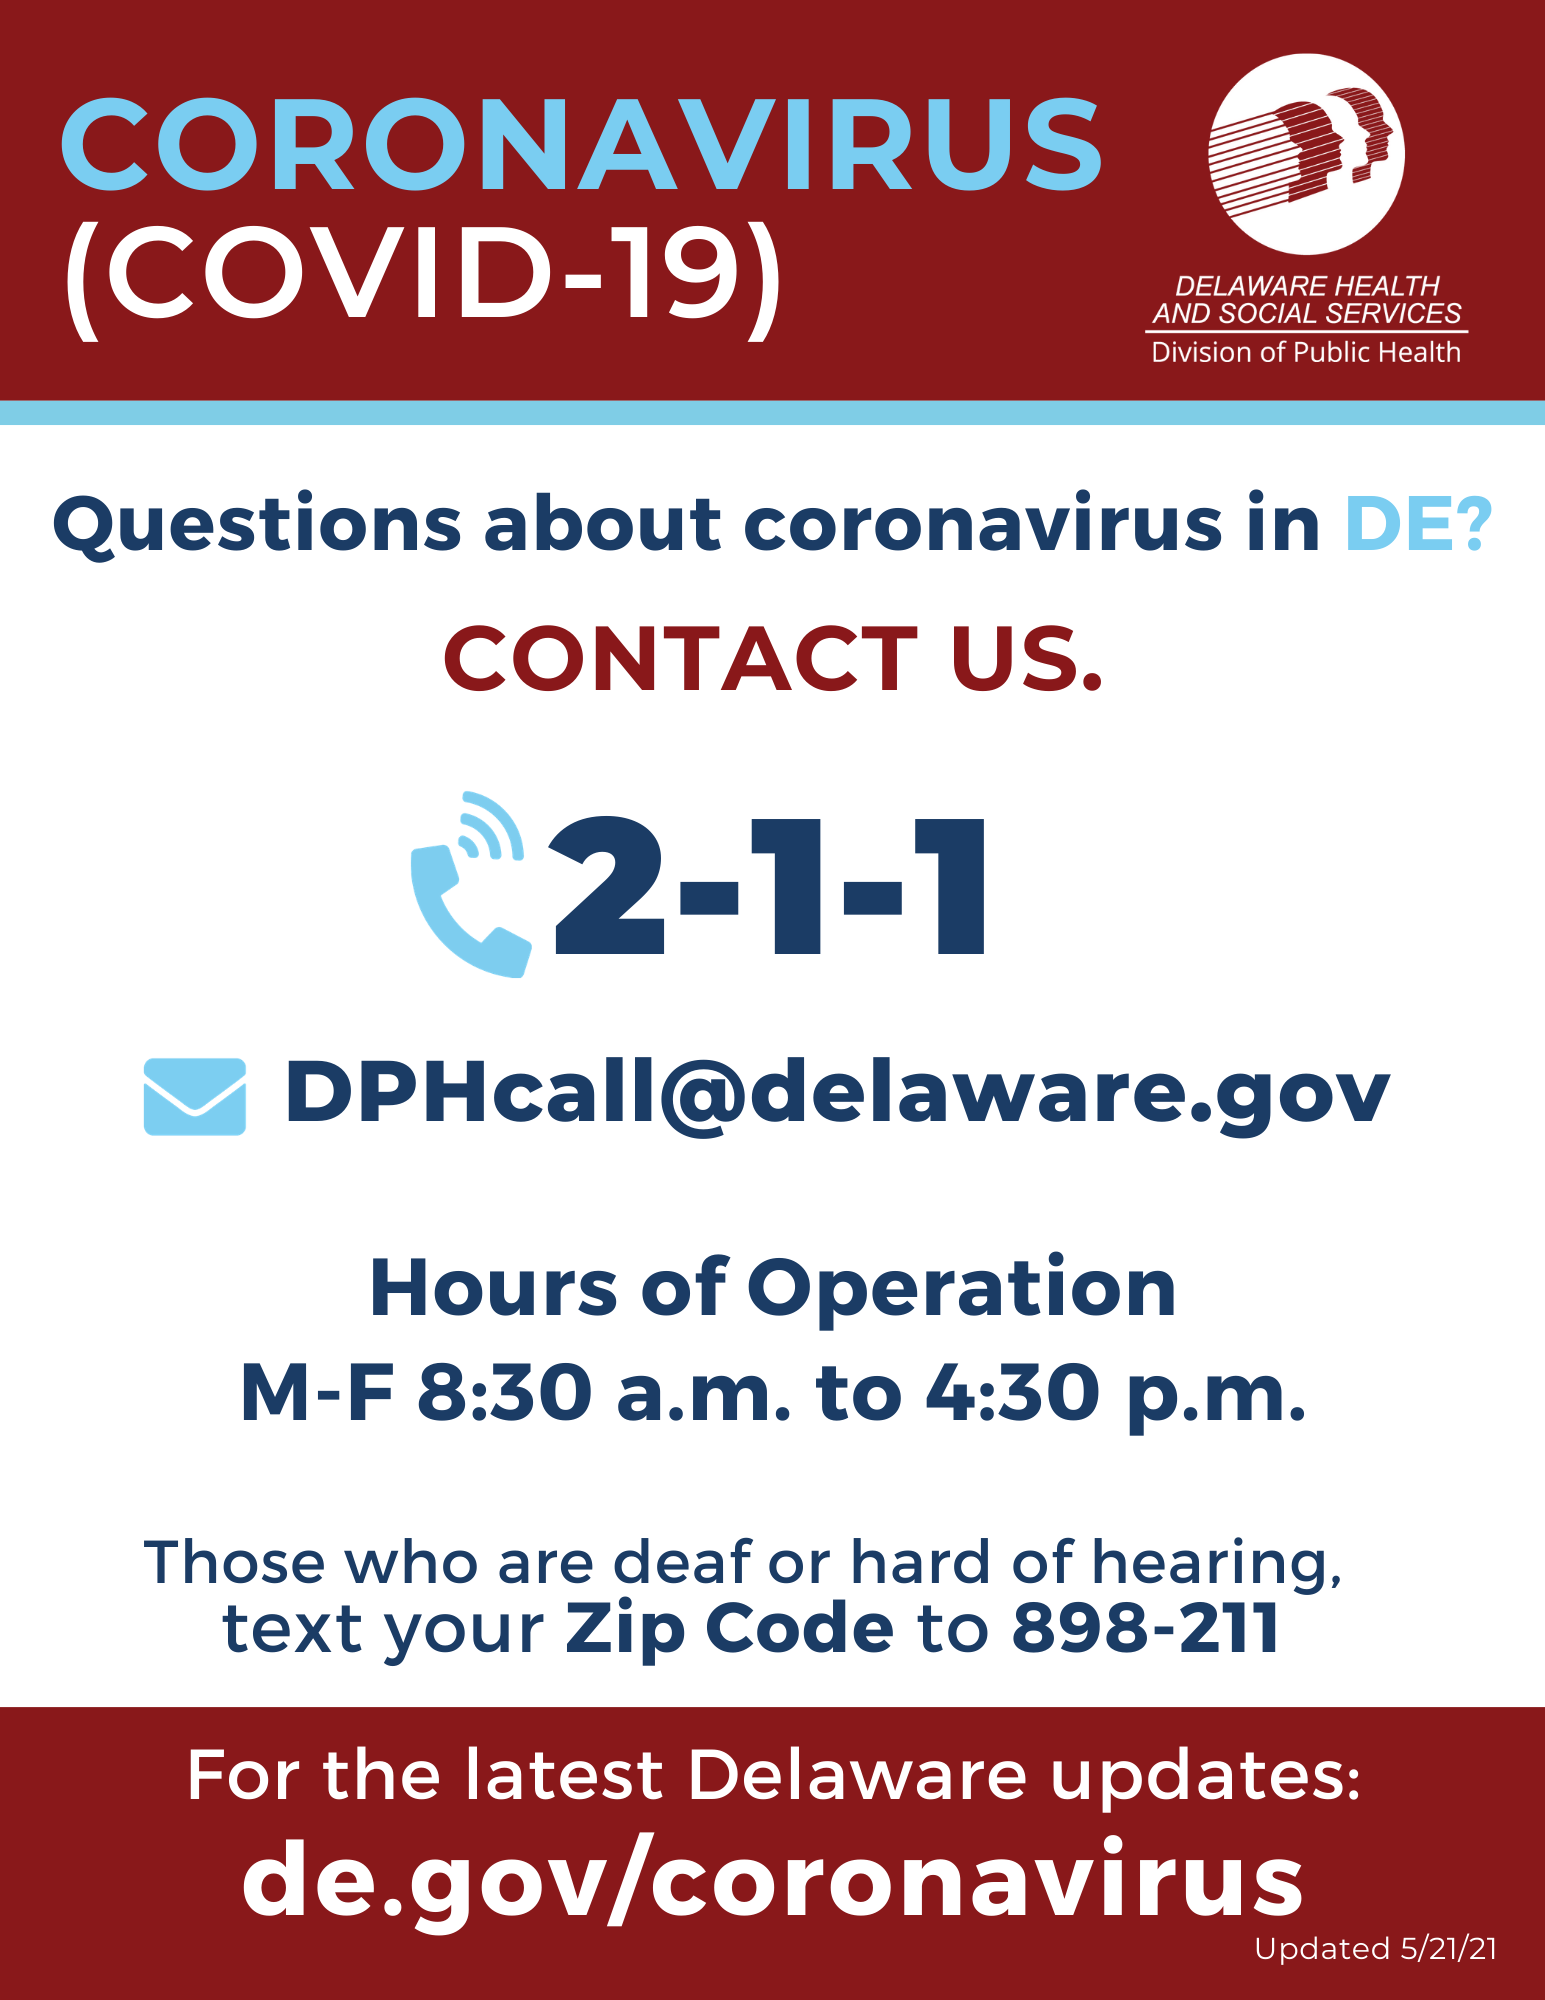 Delaware Department of Health Coronavirus Call Center Poster. Contact 2-1-1 to learn more about coronavirus.